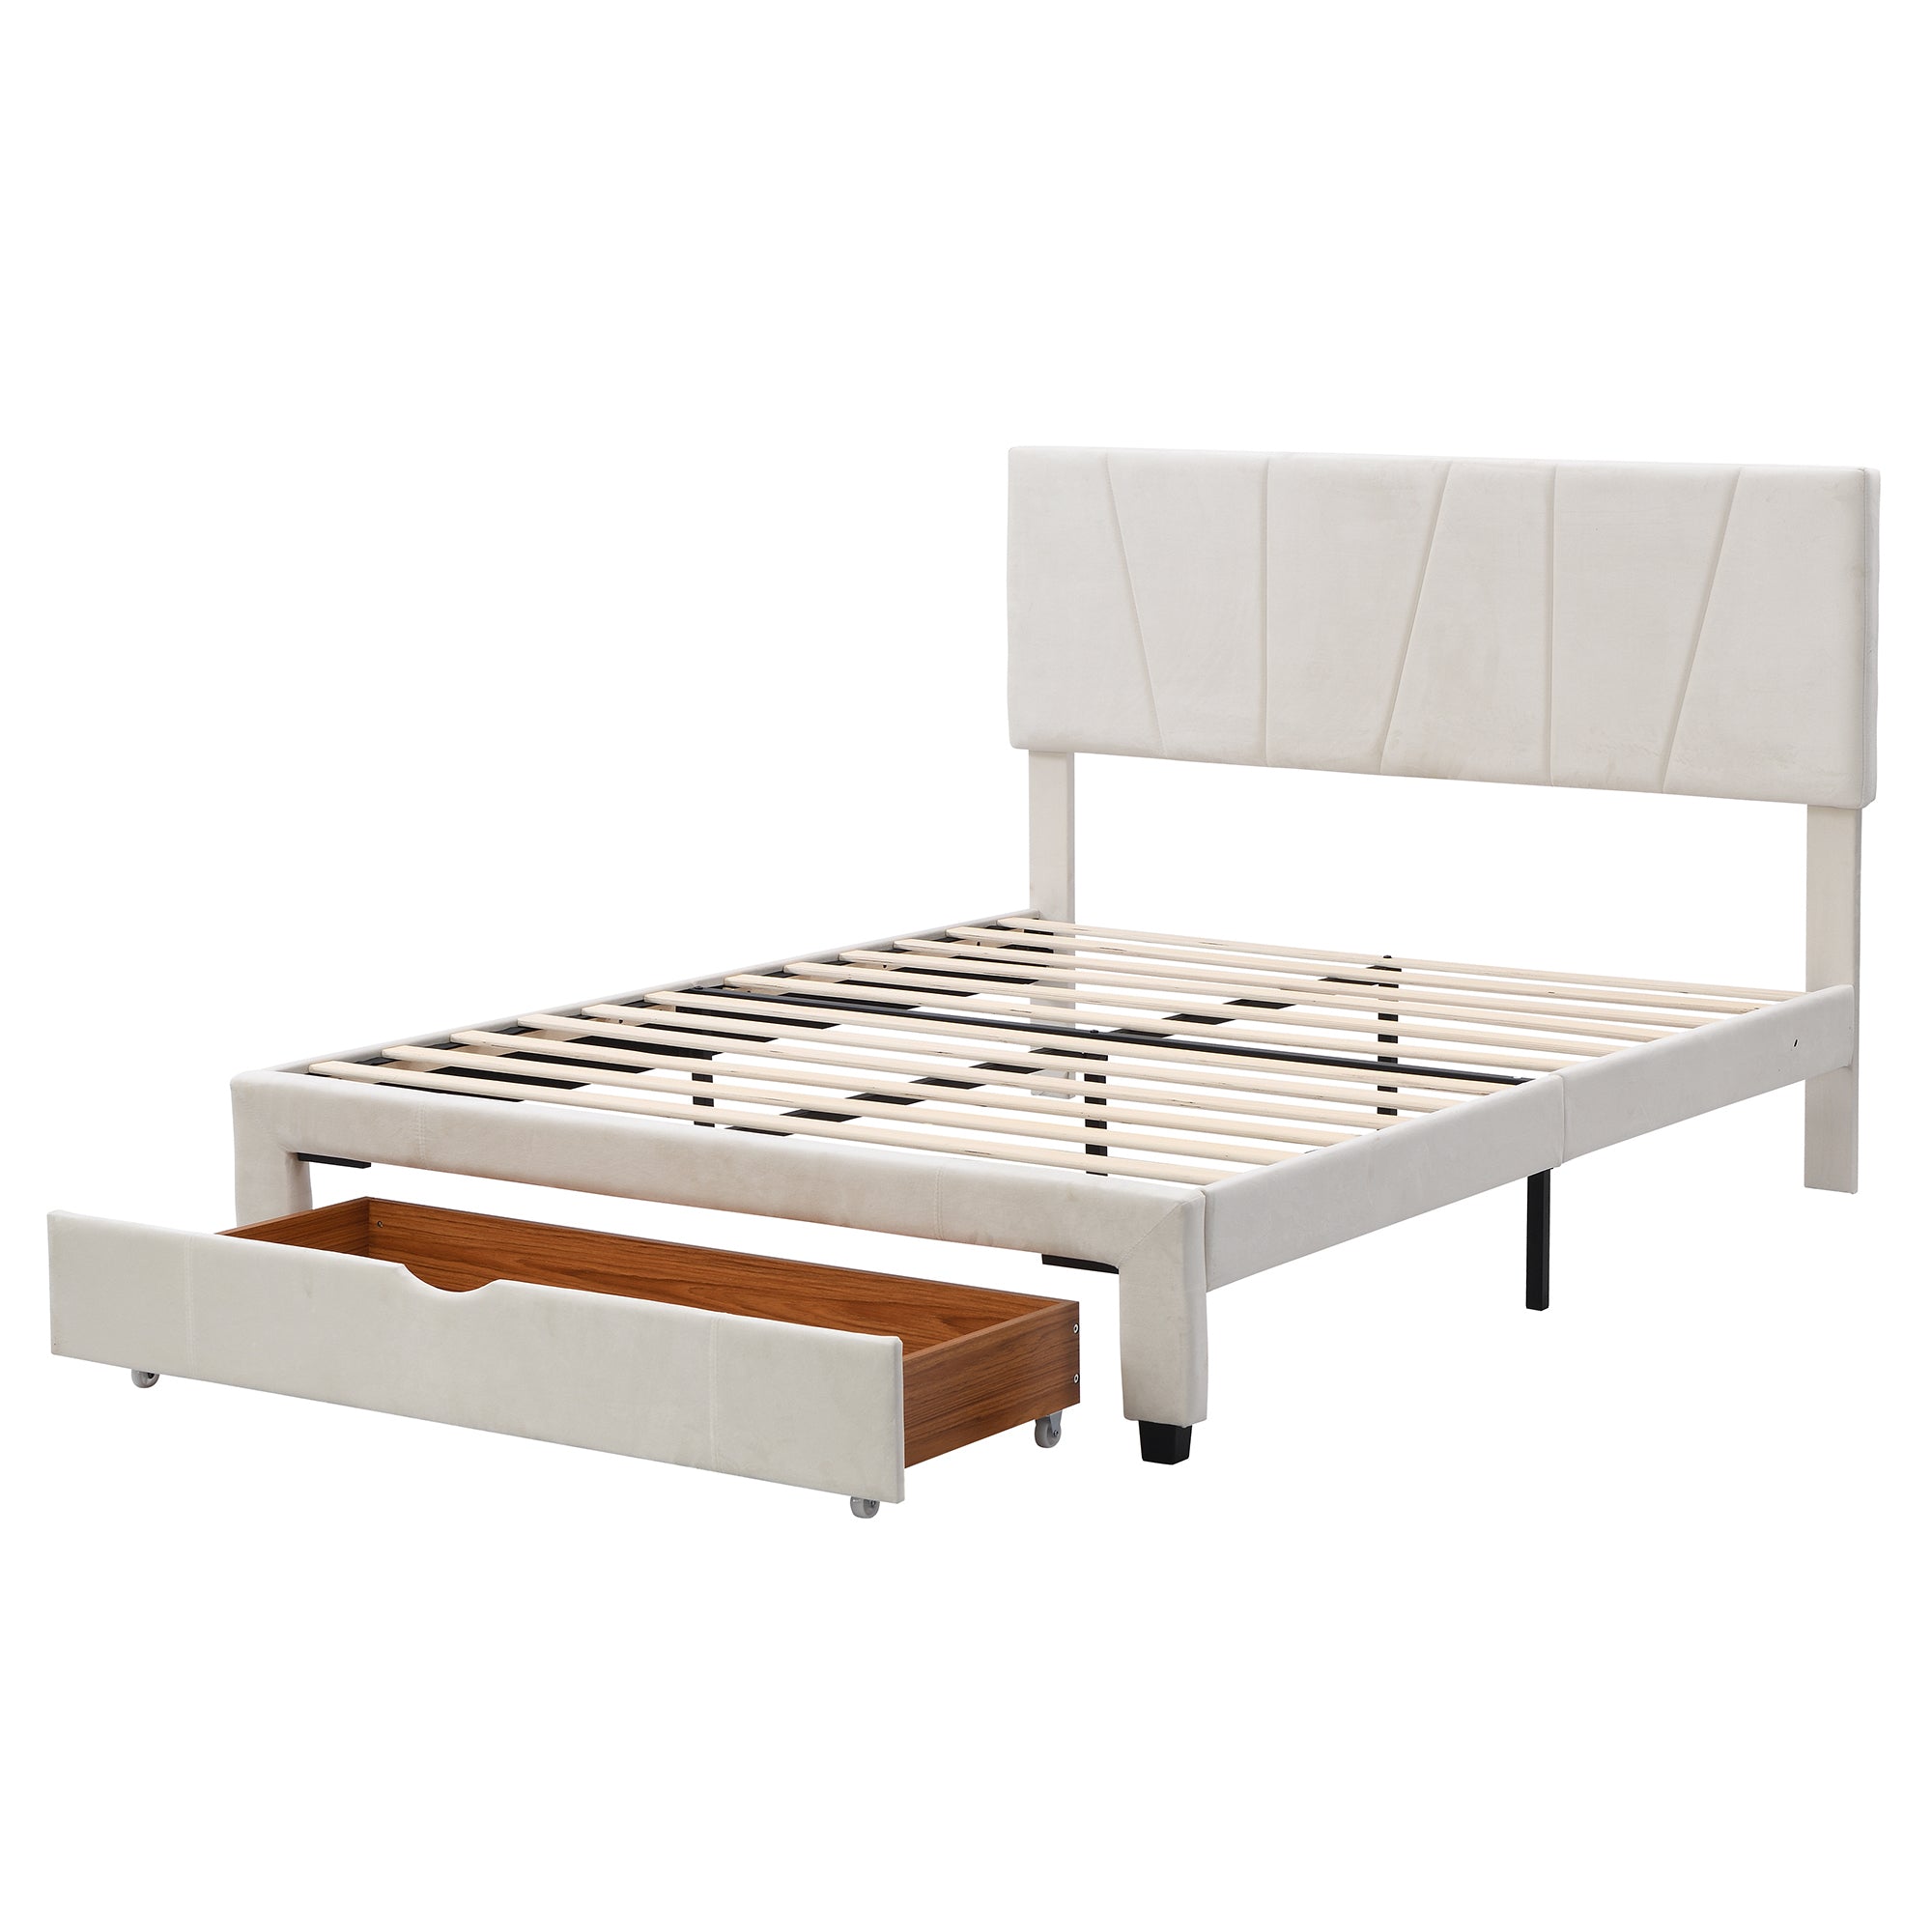 Queen Size Upholstery Platform Bed with One Drawer, Adjustable Headboard - Beige